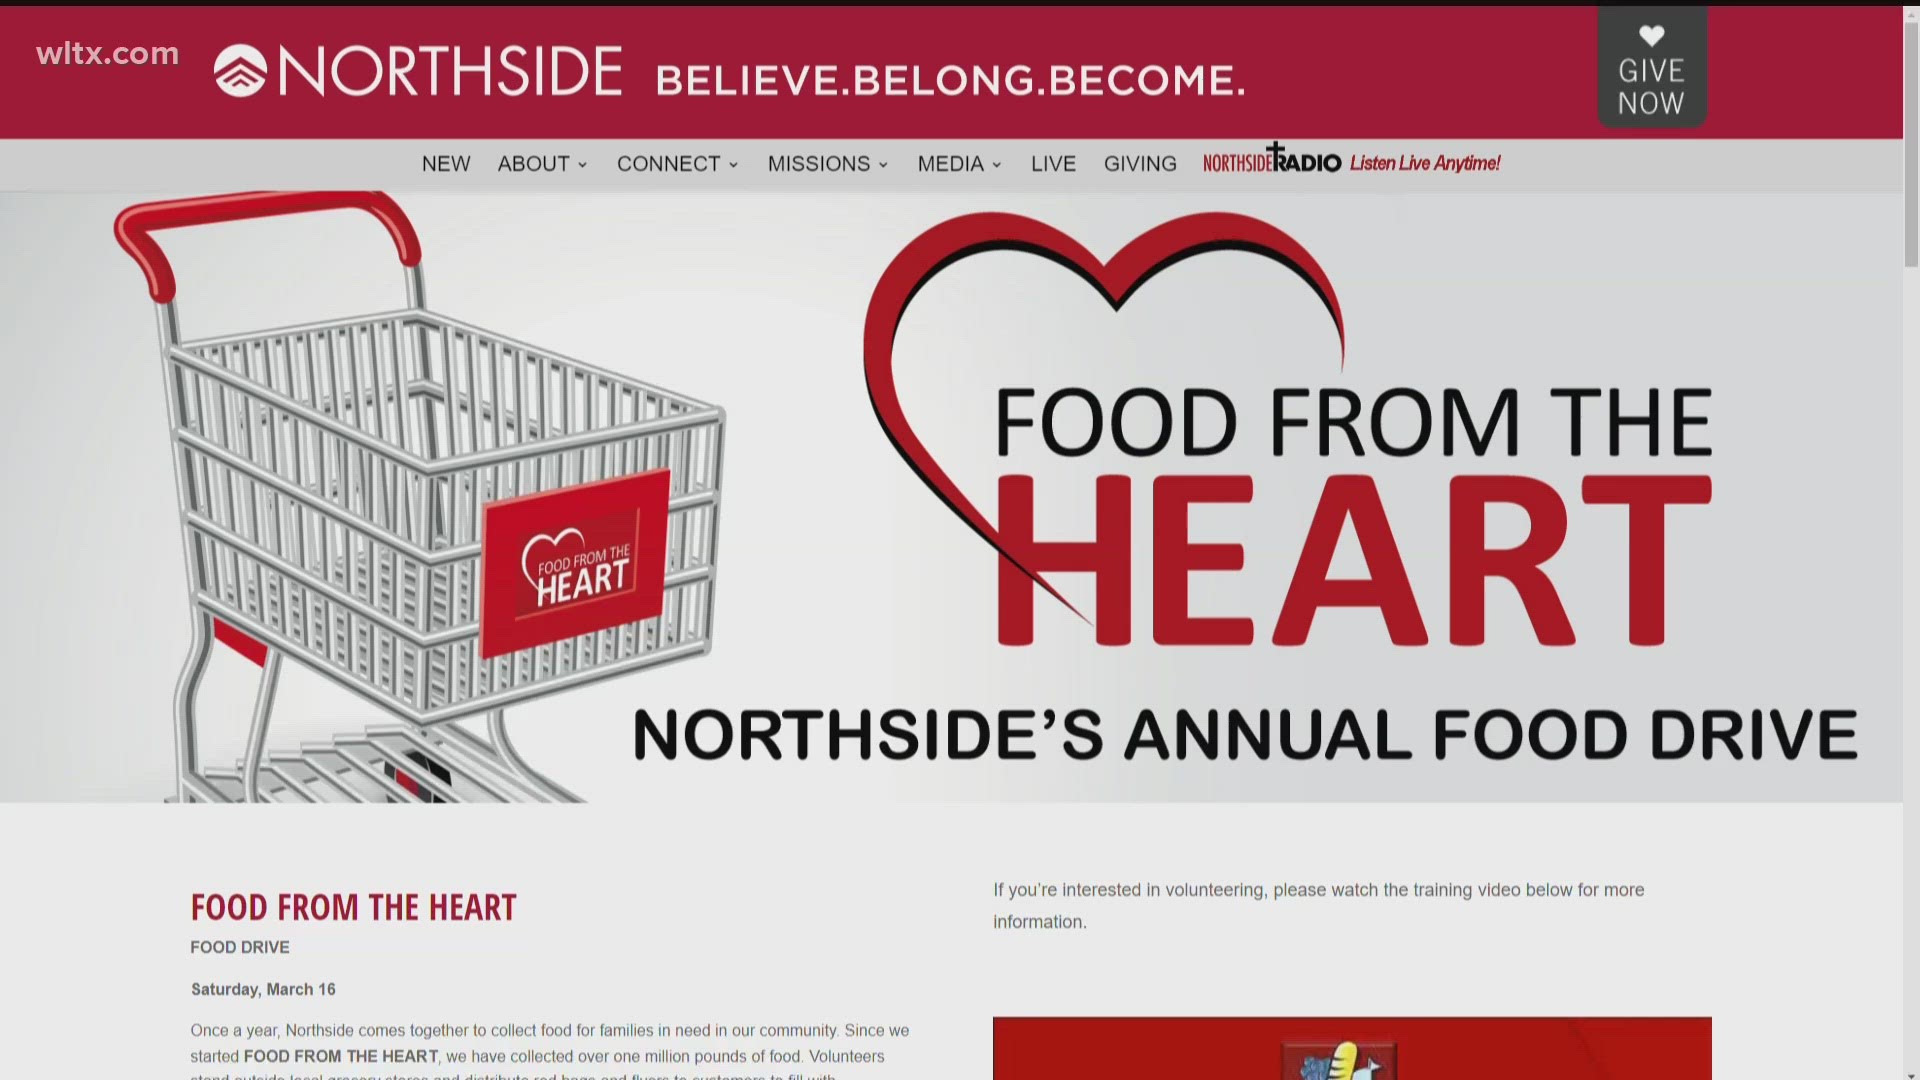 Food from the Heart collecting items at local stores March 16th